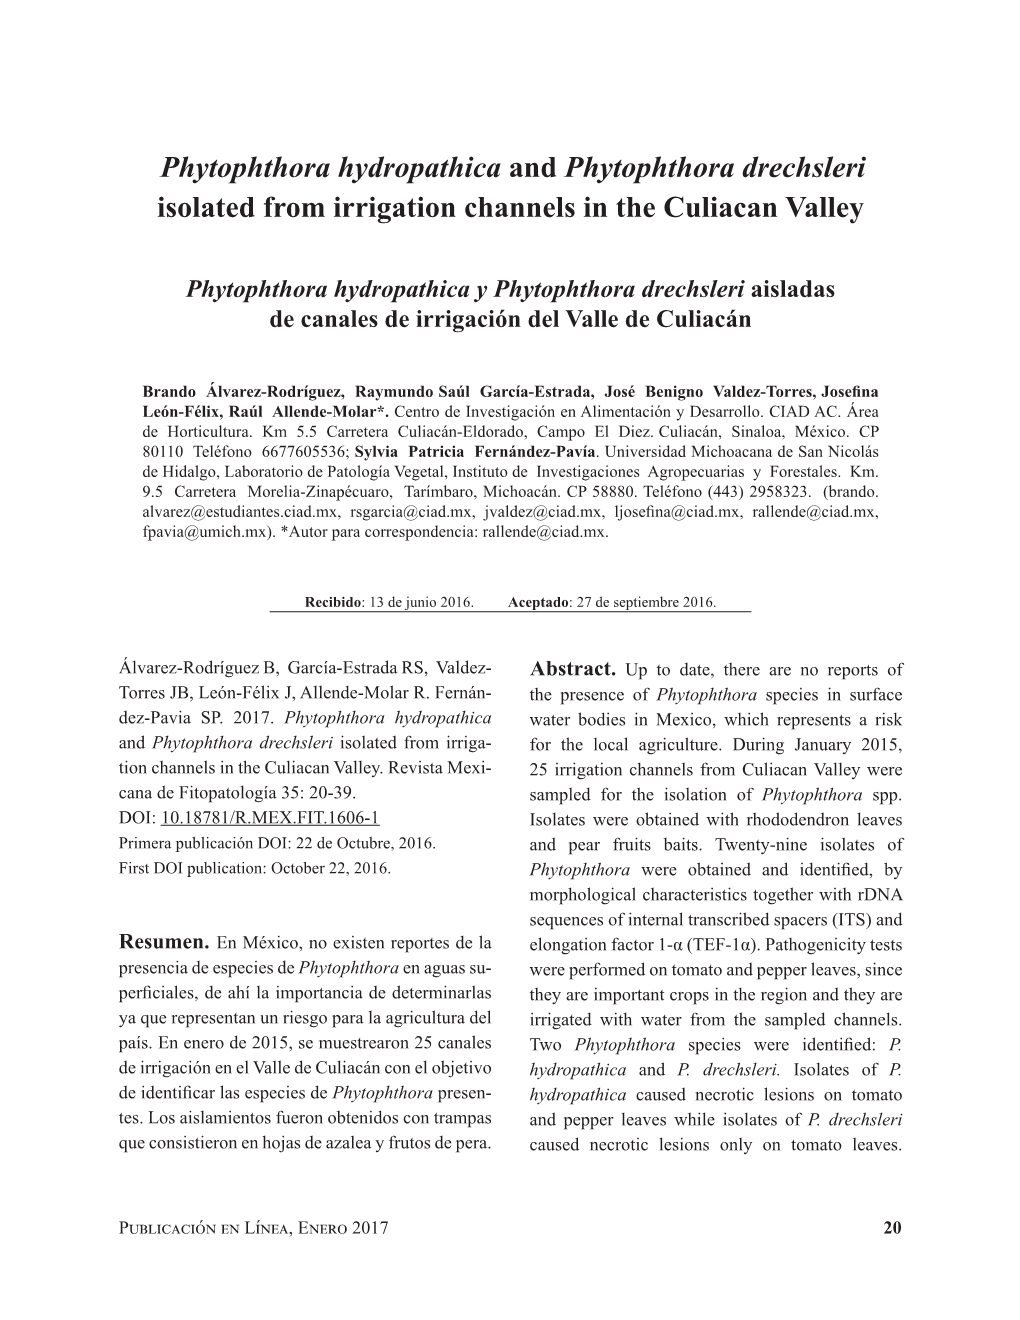 Phytophthora Hydropathica and Phytophthora Drechsleri Isolated from Irrigation Channels in the Culiacan Valley